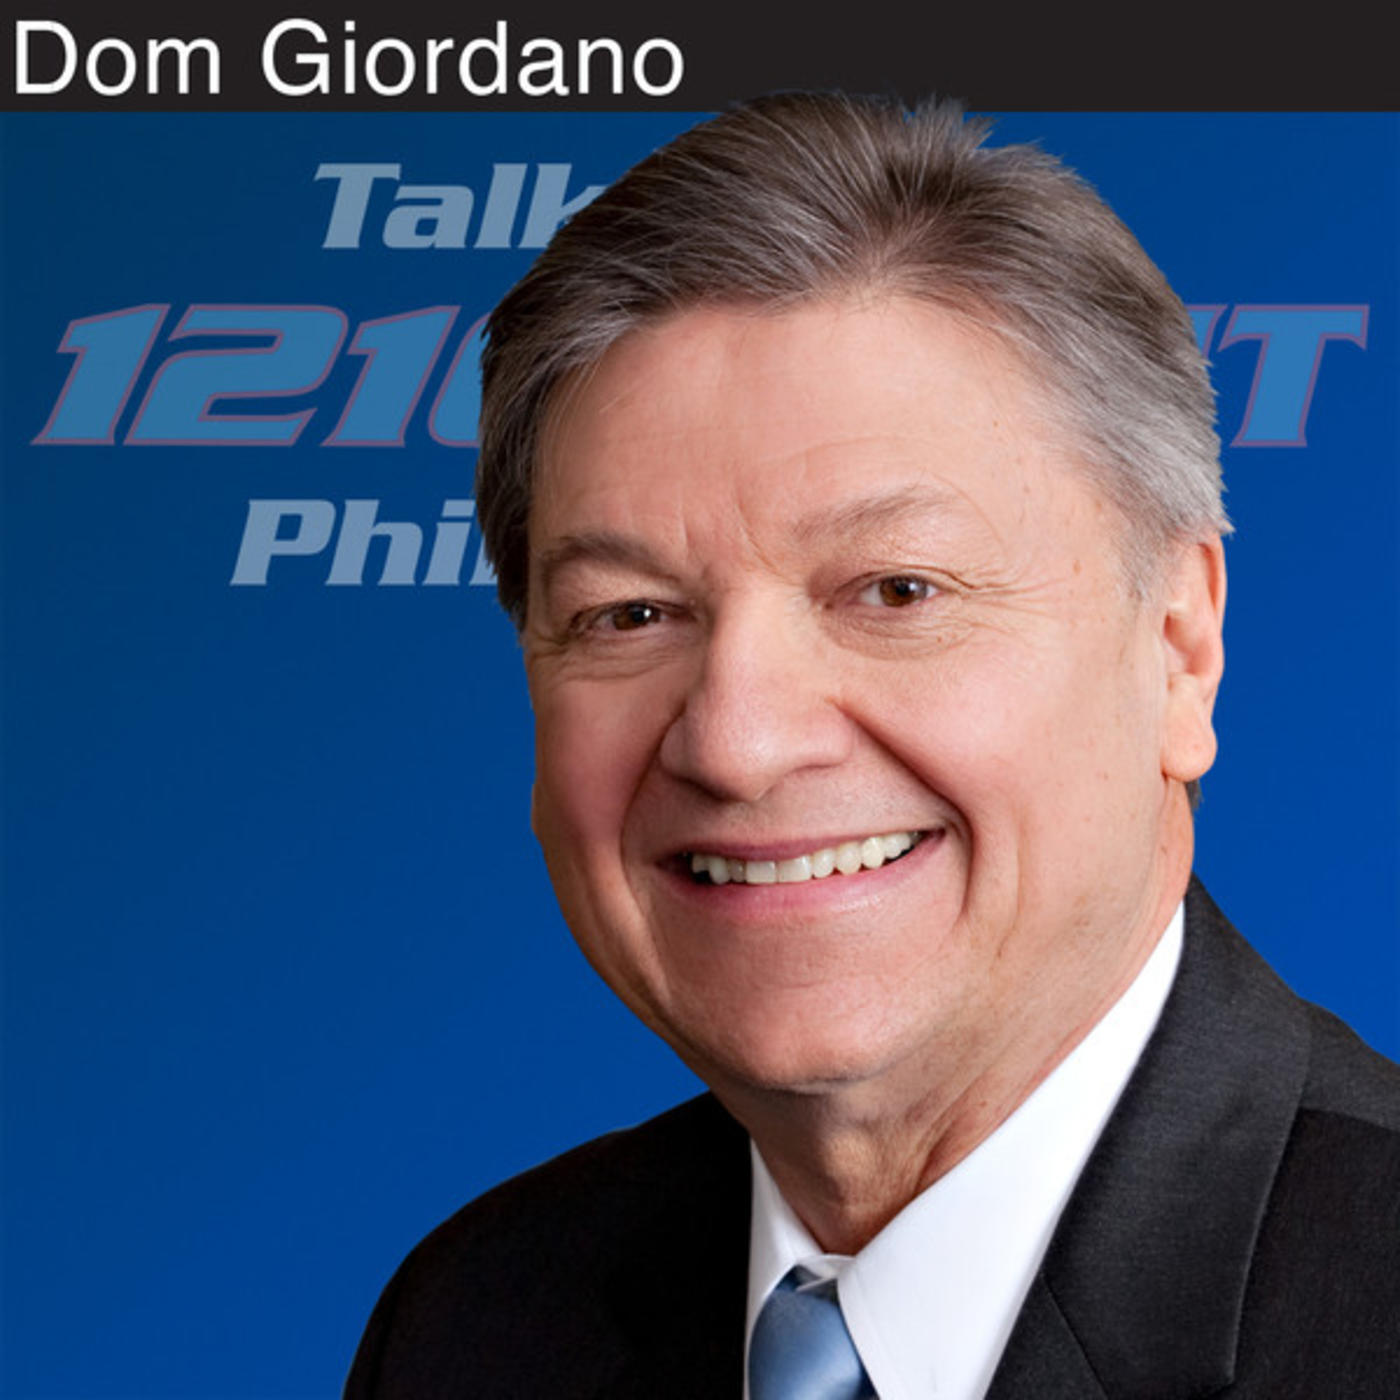 Dom Giordano LIVE from Farley Service Plaza | Hour 2